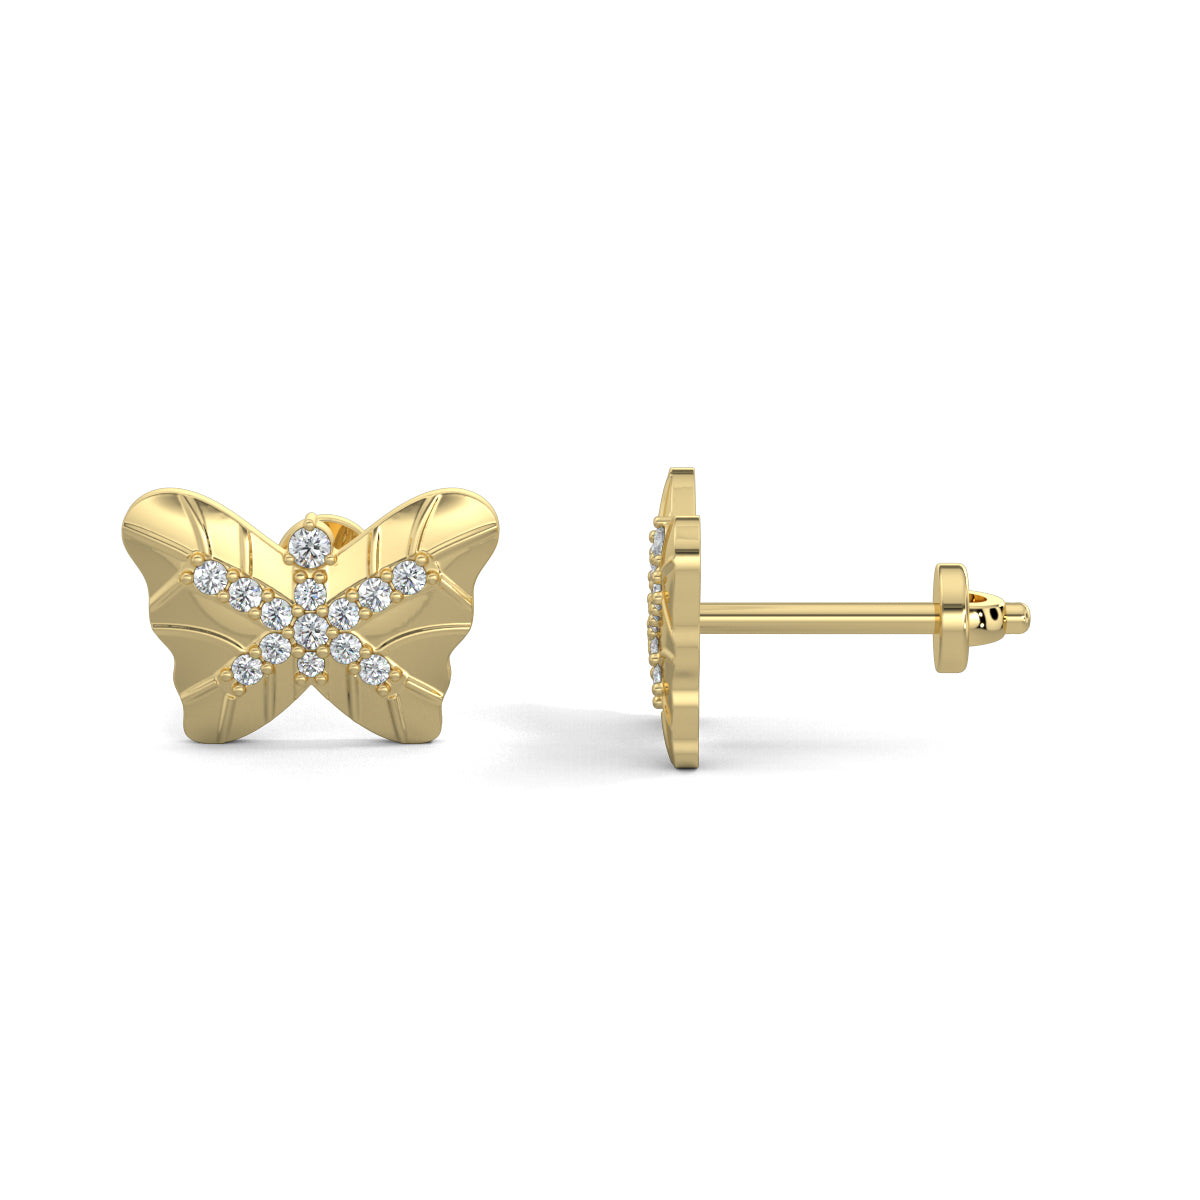 Yellow Gold, Diamond stud earrings, butterfly shape, natural diamonds, lab-grown diamonds, exquisite jewelry, elegant earrings, shimmering diamonds, sophisticated design